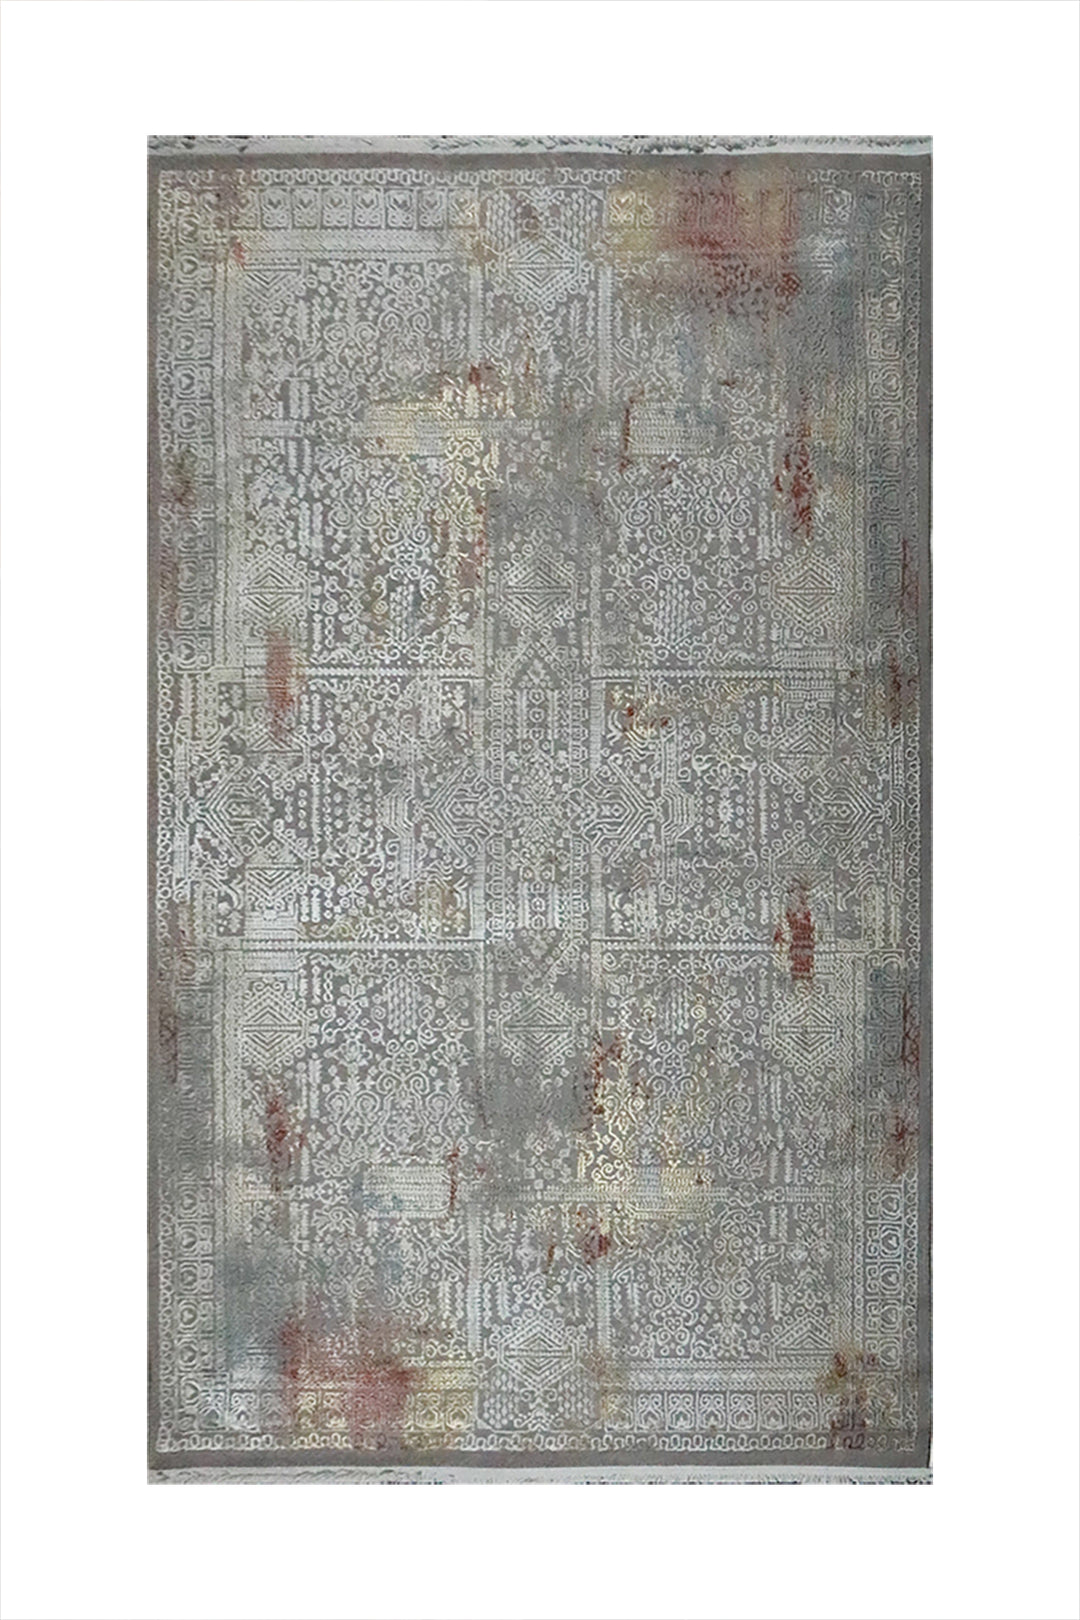 Turkish Modern  Festival 1 Rug - Gray and Cream - 5.2 x 7.5 FT - Superior Comfort, Modern Style Accent Rugs